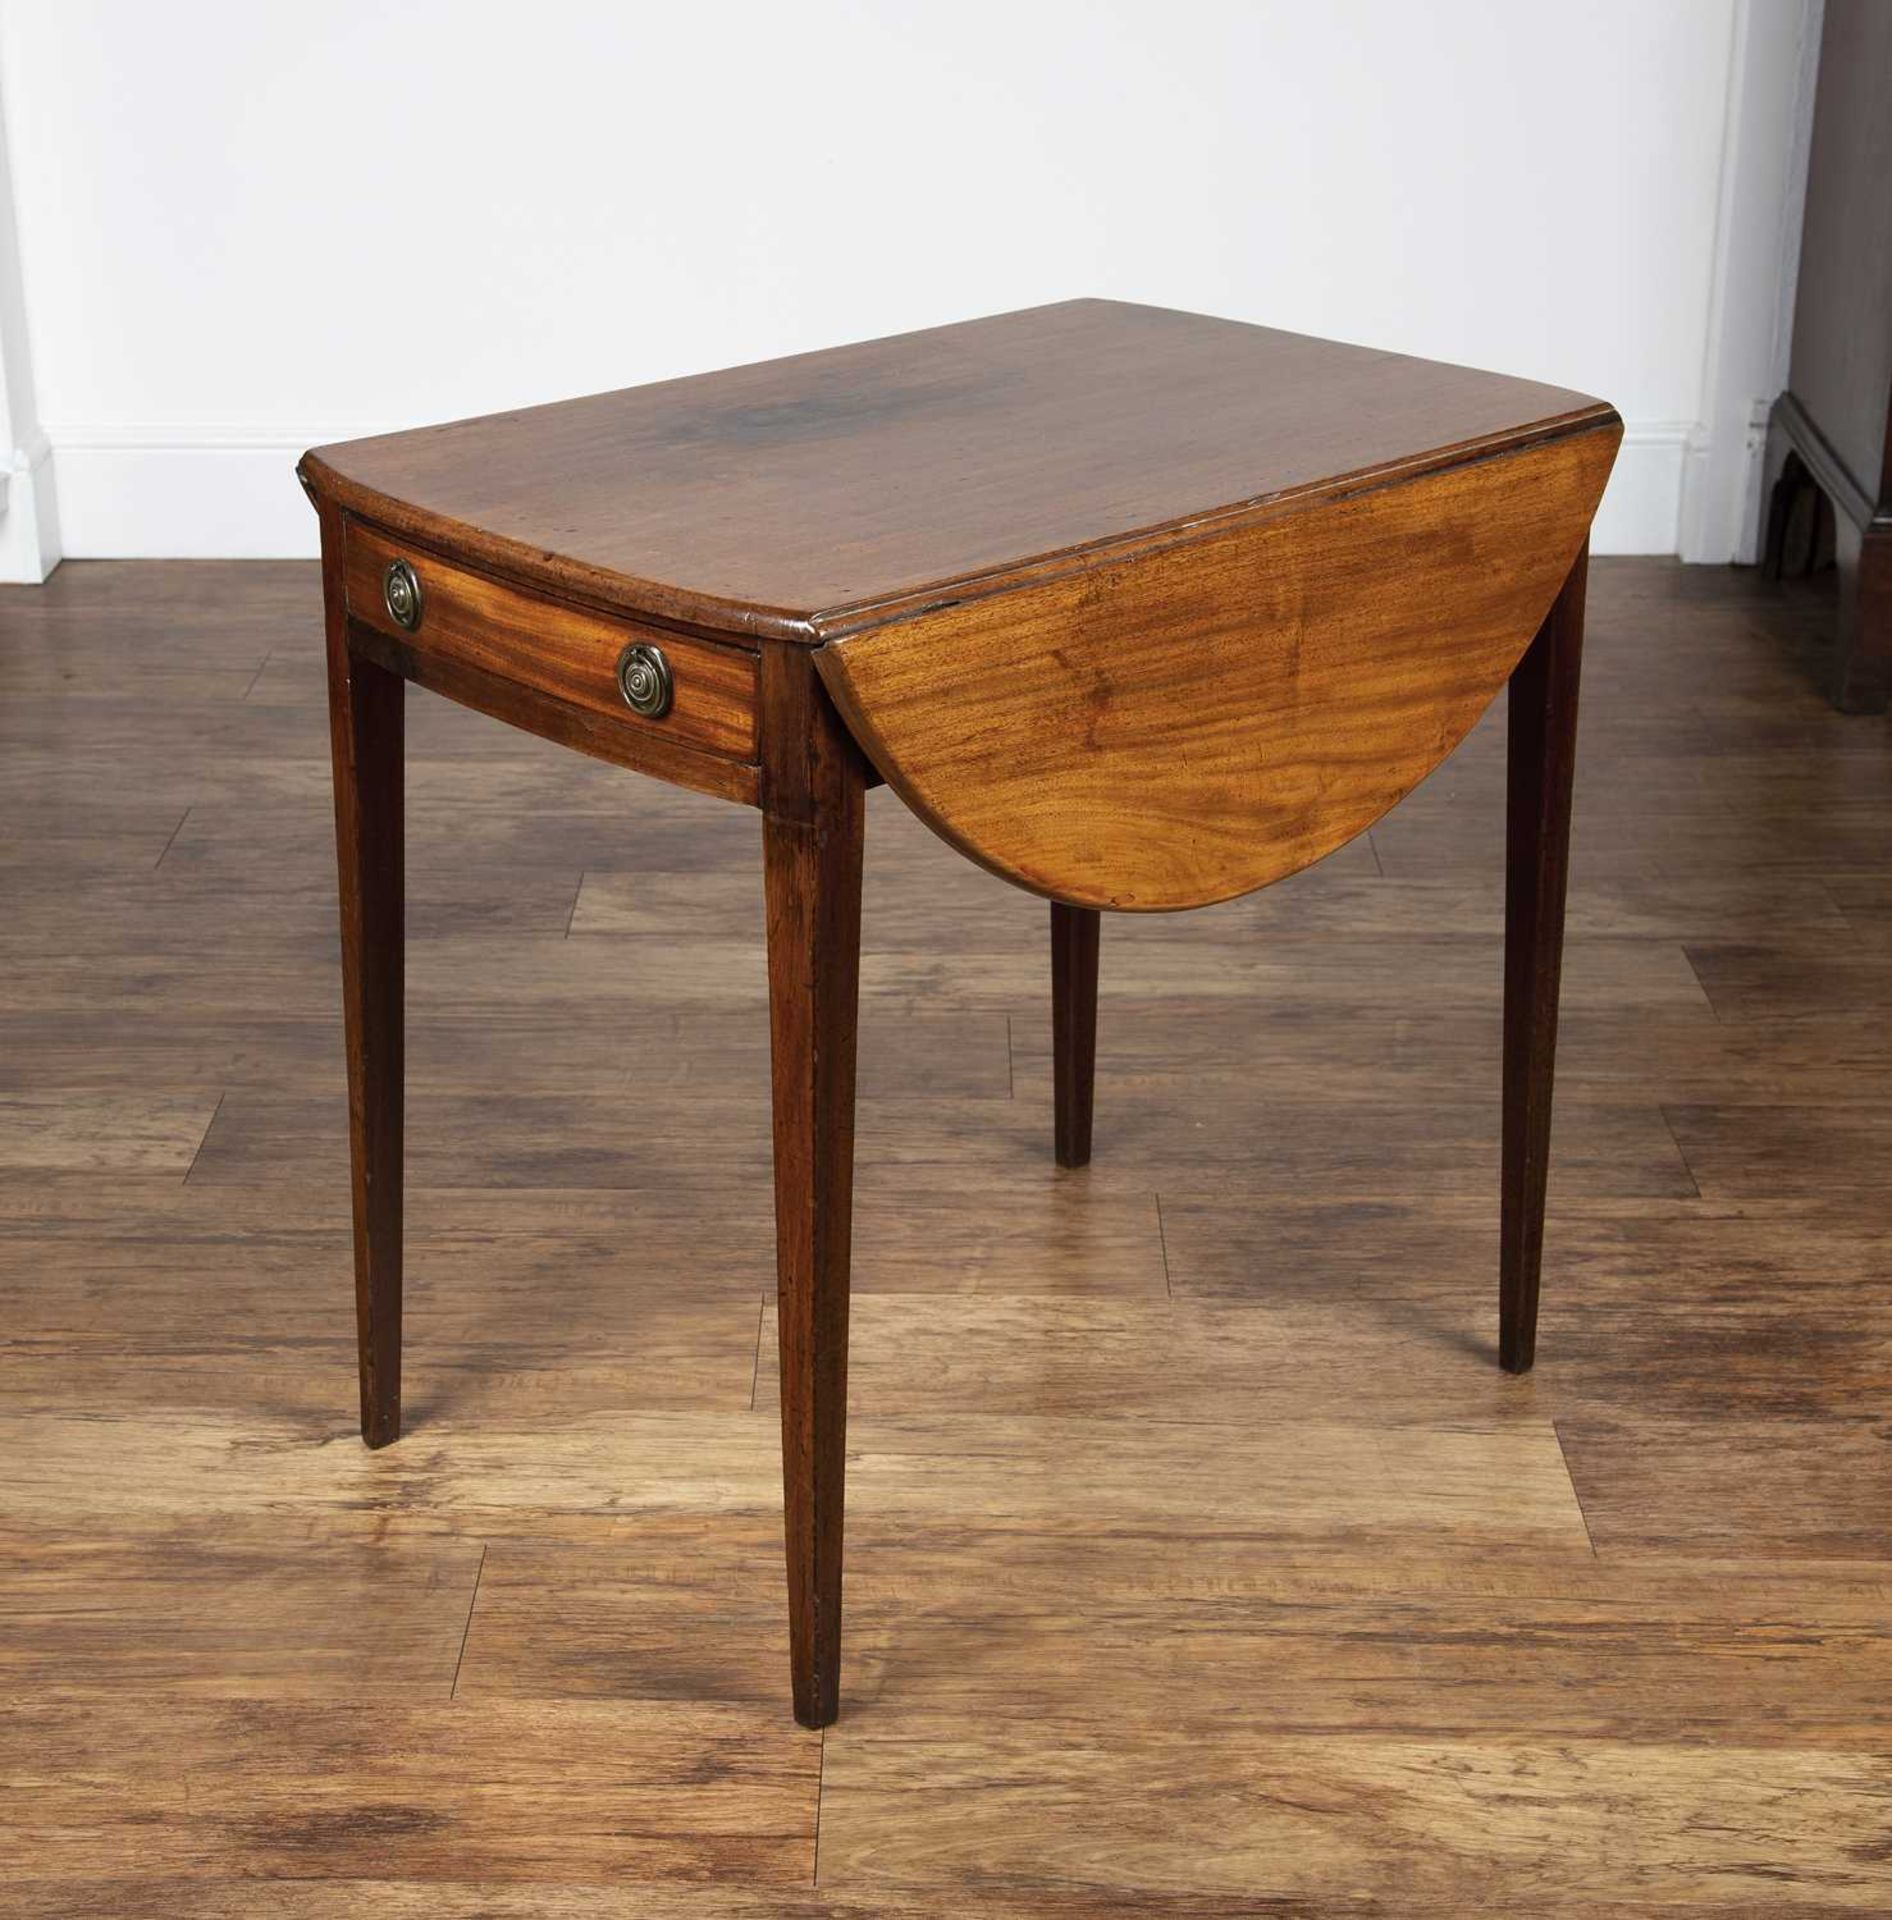 Mahogany Pembroke table 19th Century, fitted with a single frieze drawer and one faux drawer, on - Image 2 of 4